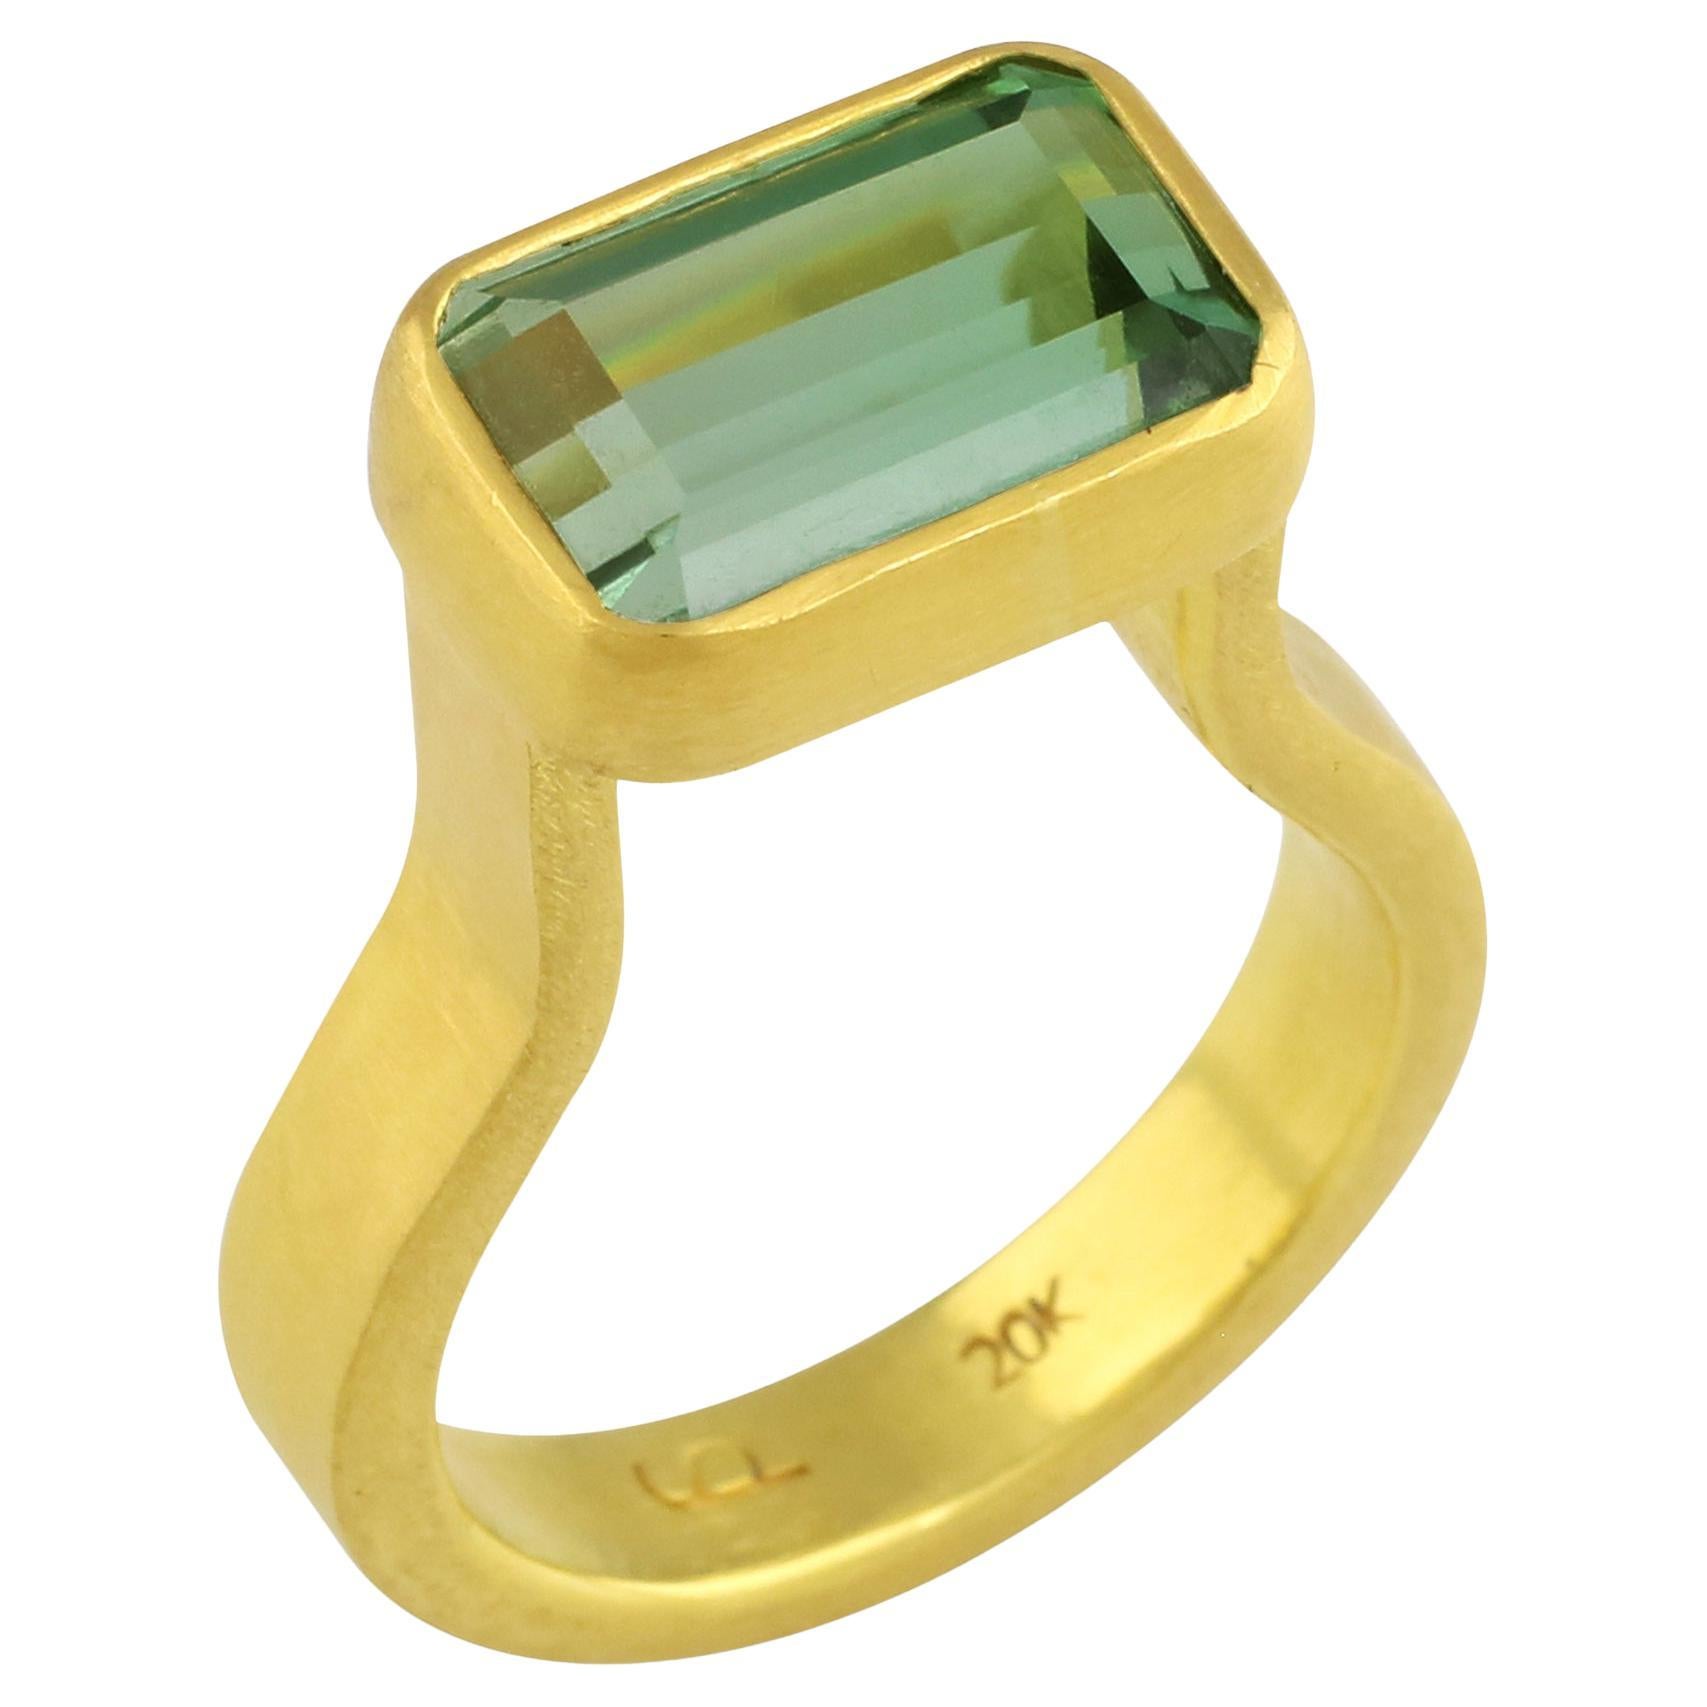 PHILIPPE SPENCER 5.26 Ct. Green Tourmaline in 22K and 20K Gold Statement Ring